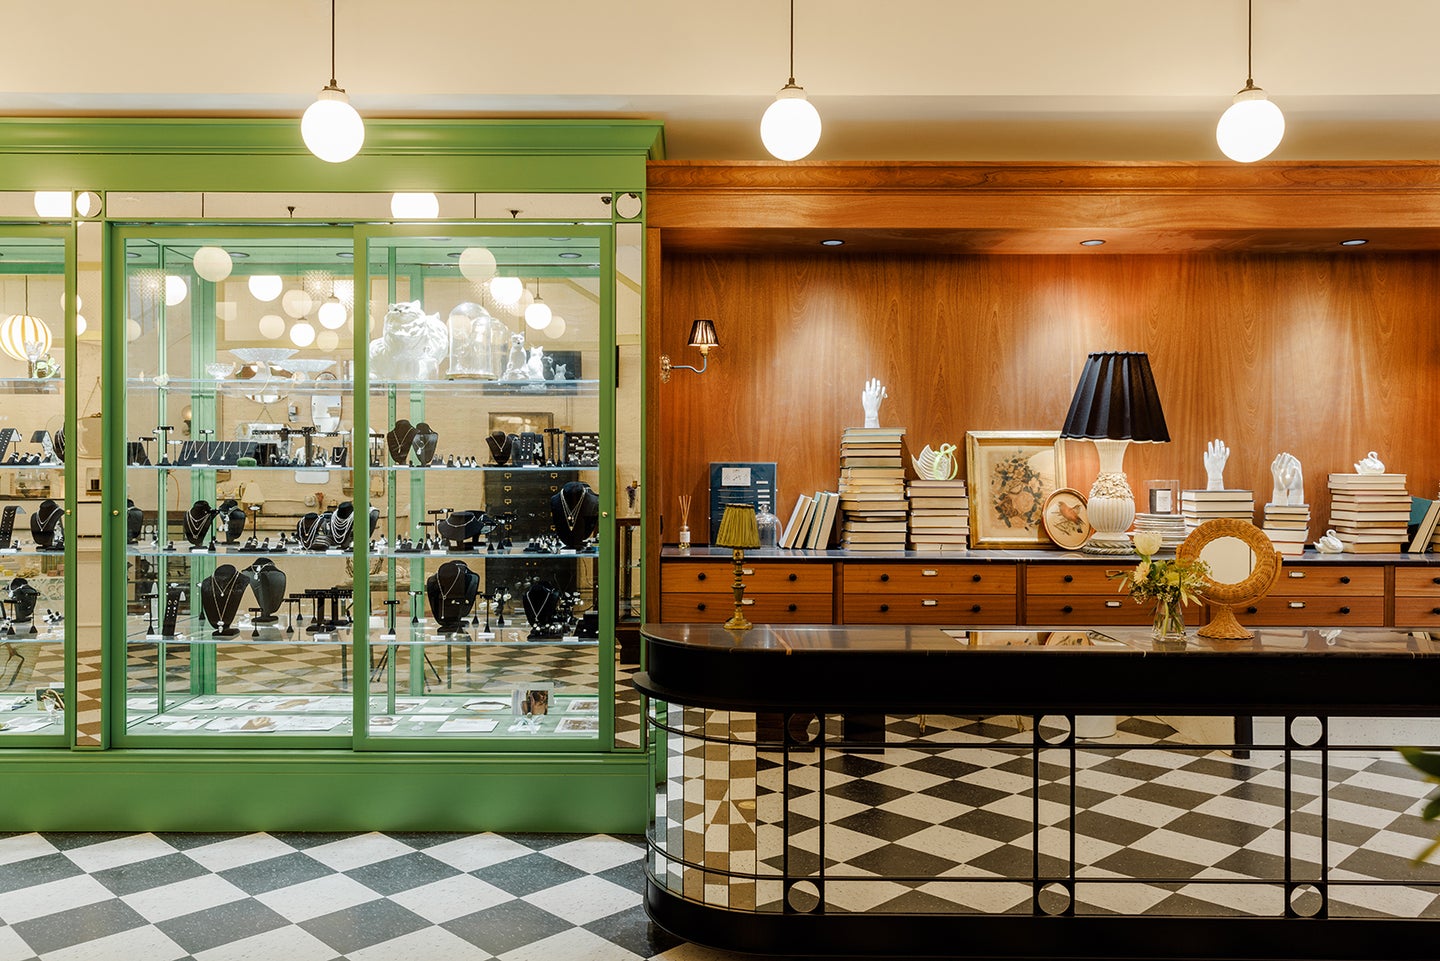 Catbird interior with green case and checkerboard floor